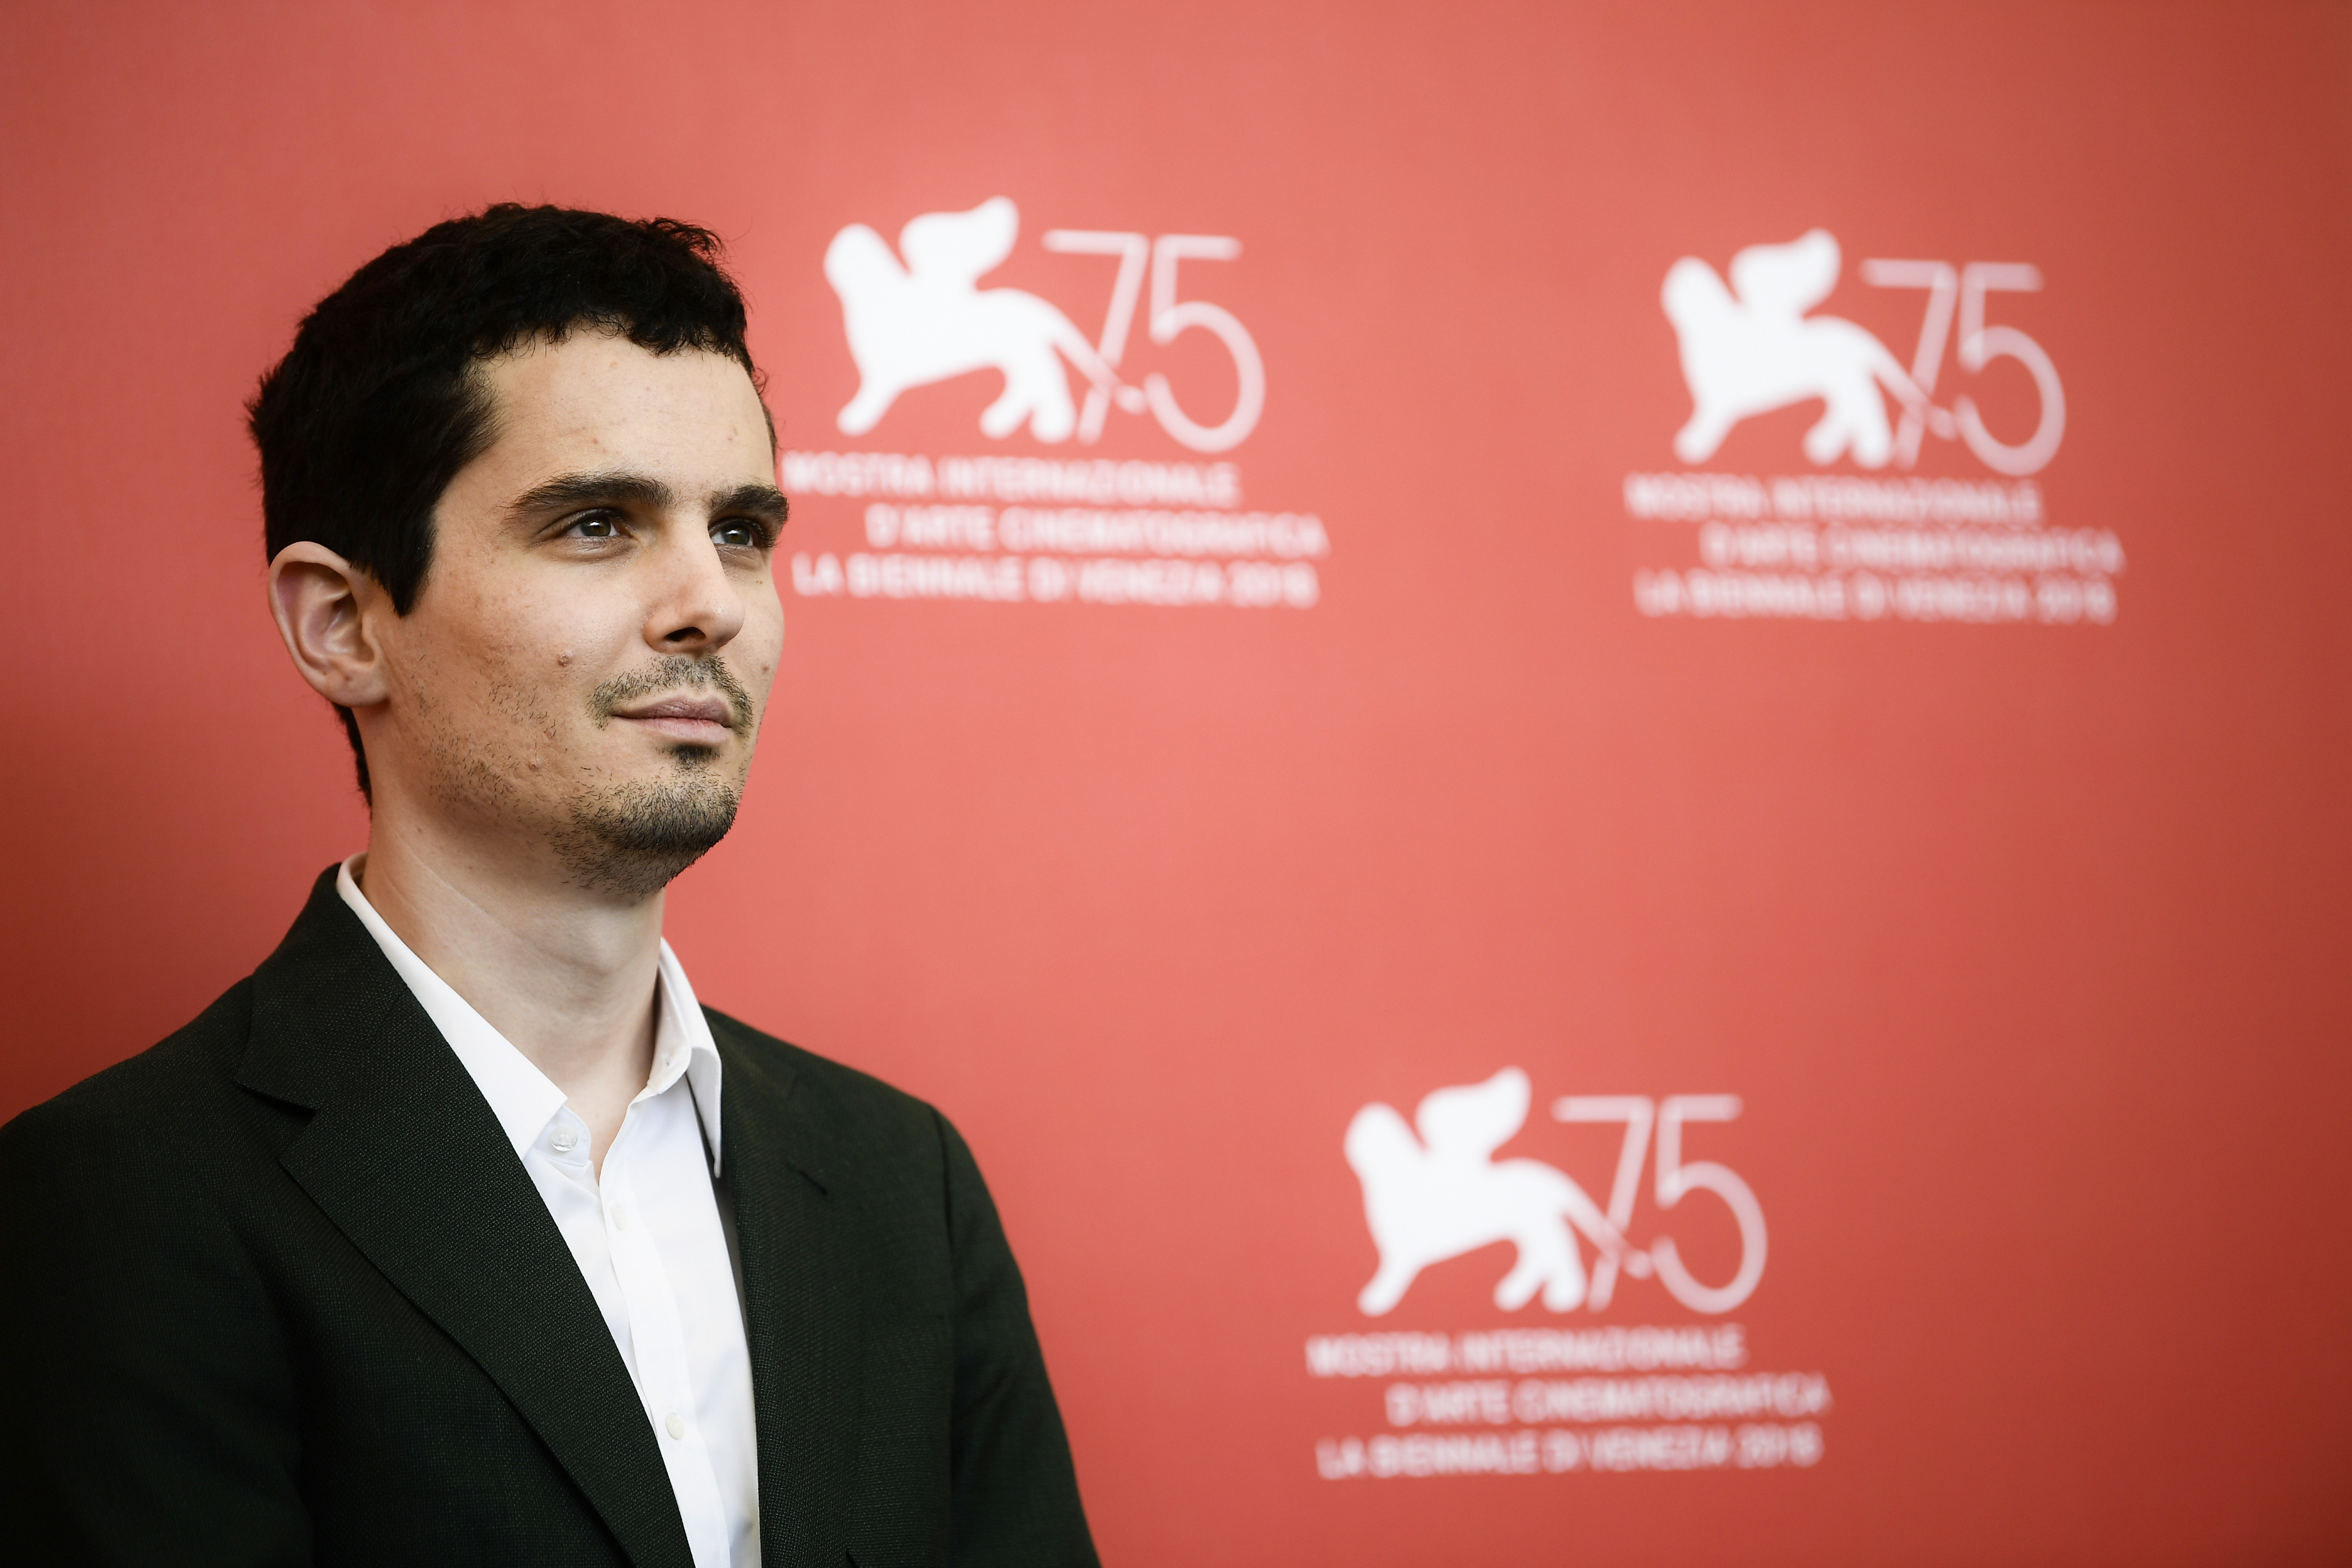 Director Damien Chazelle during a photocall for the film "First Man" on August 29, 2018 prior to its premiere in competition at the 75th Venice Film Festival at Venice Lido. (Filippo Monteforte—AFP/Getty Images)